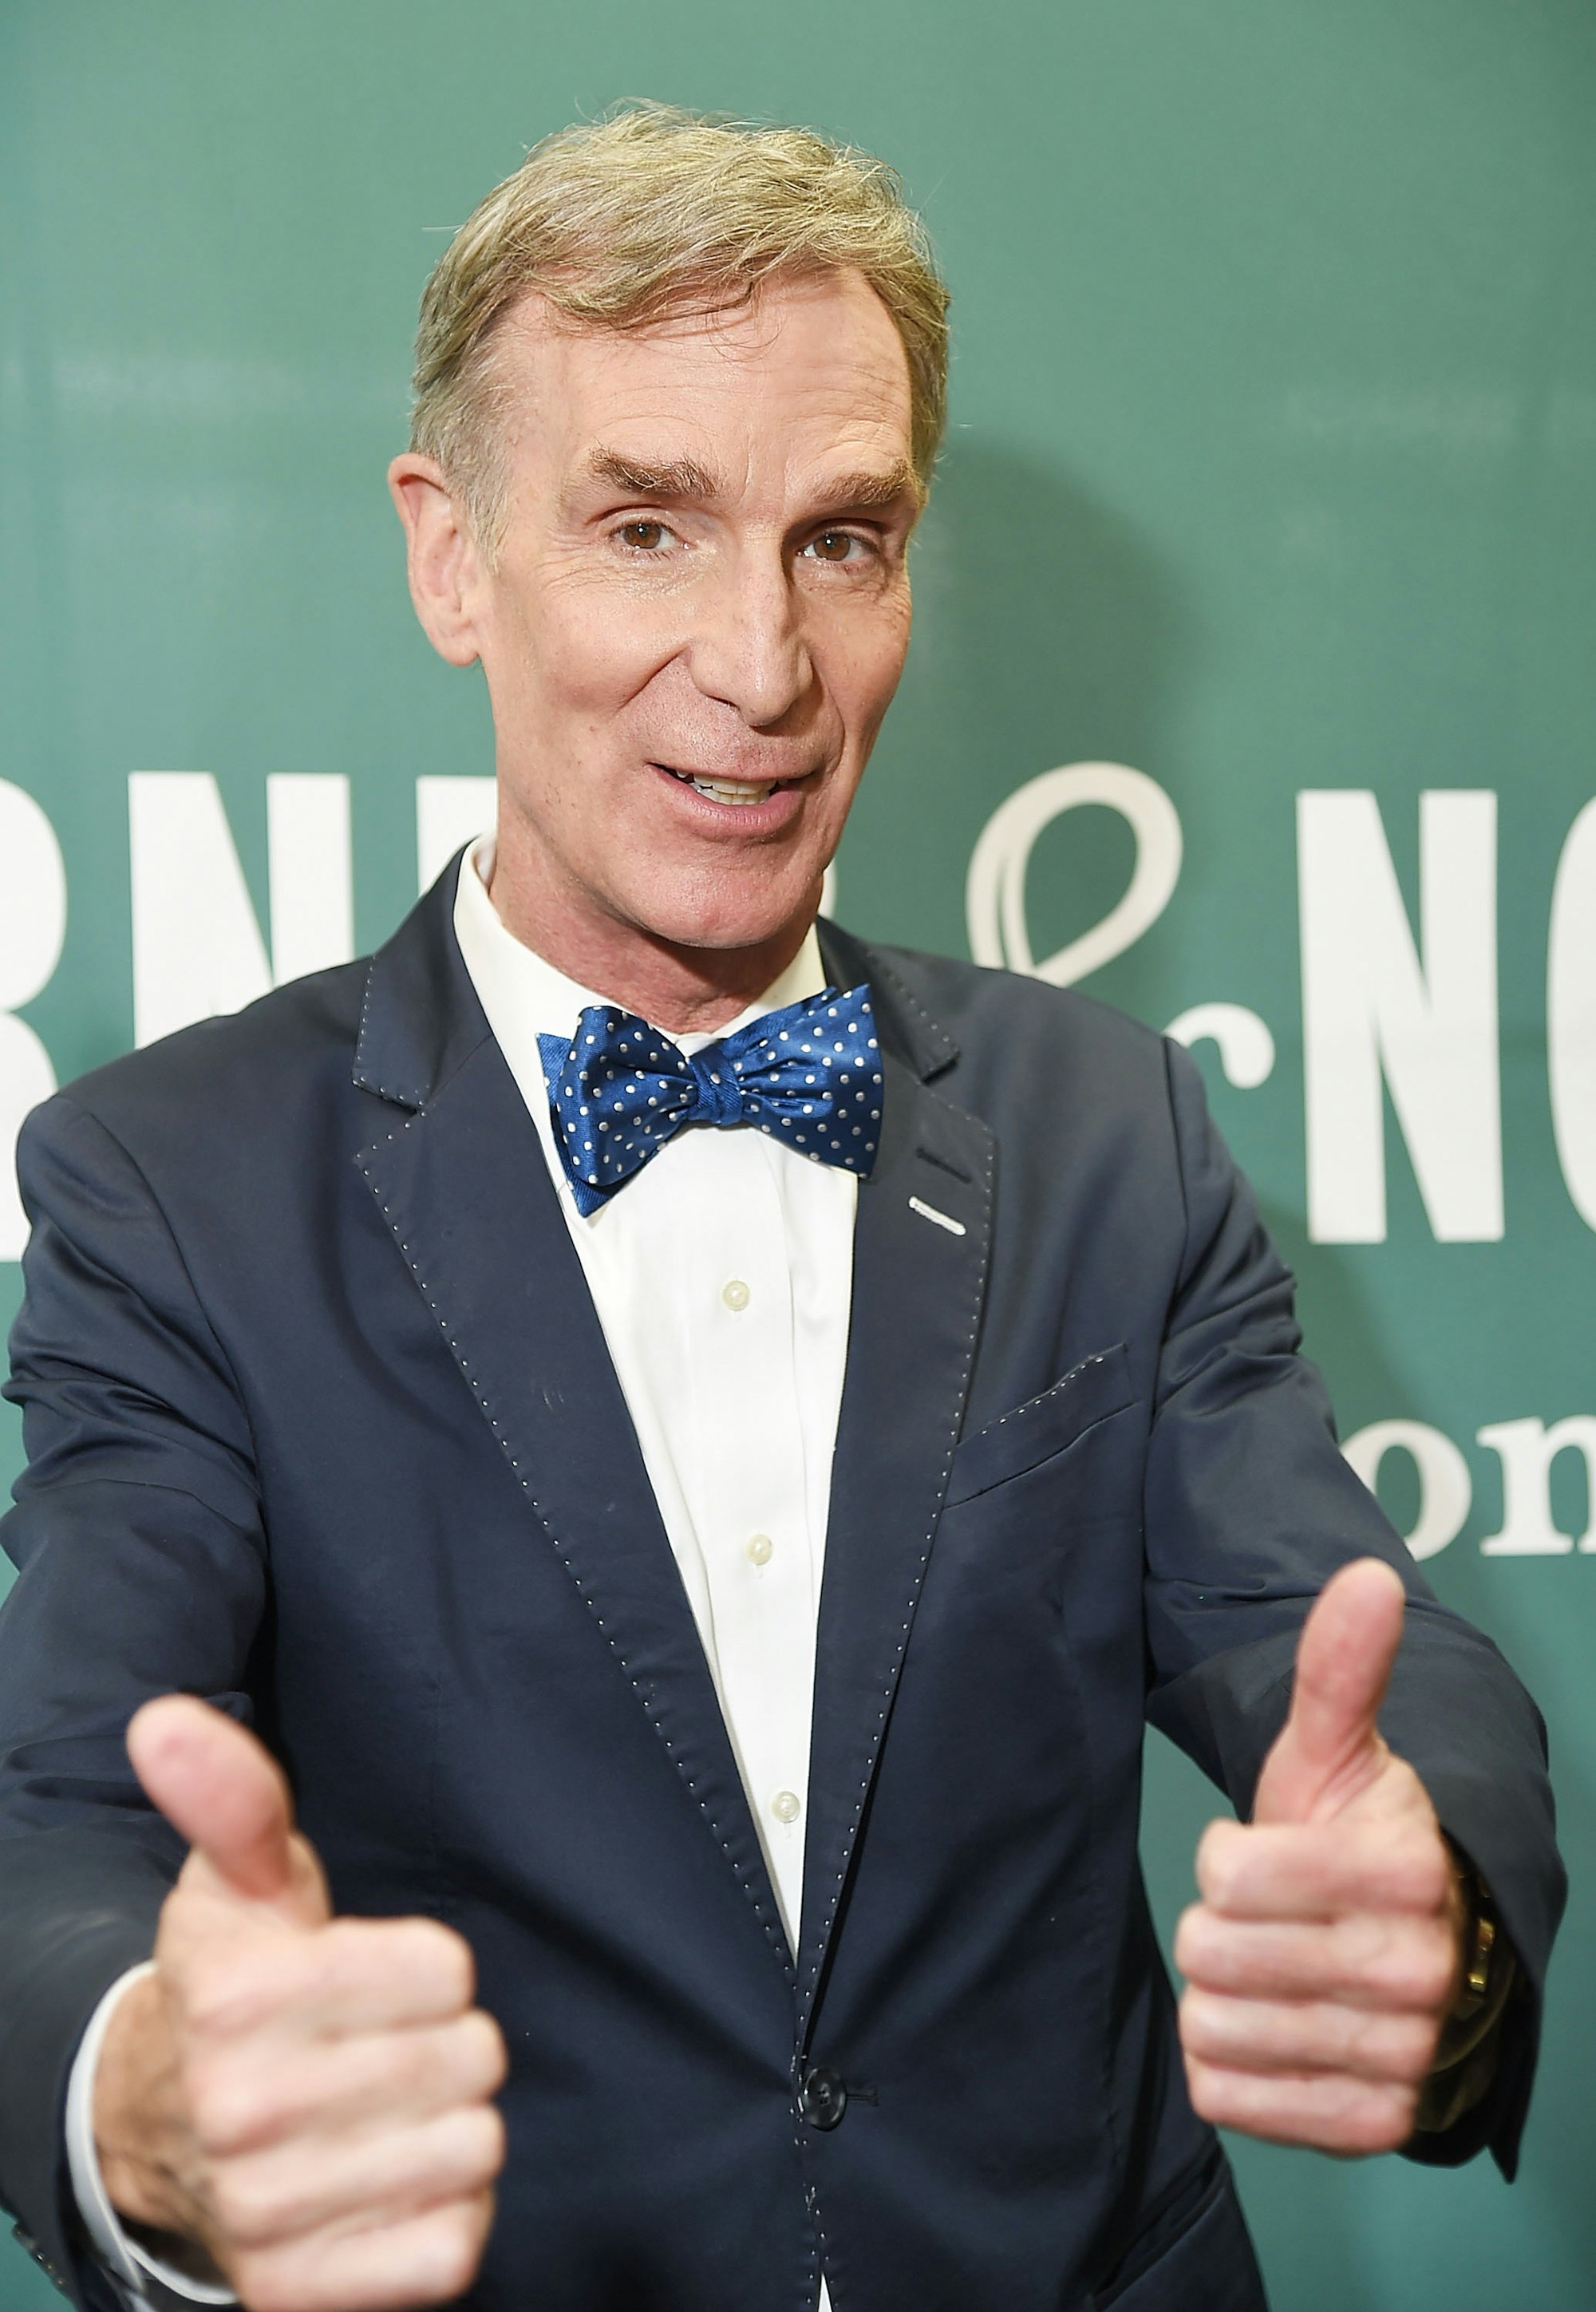 bill-nye-says-science-can-survive-trump-but-don-t-use-his-approach